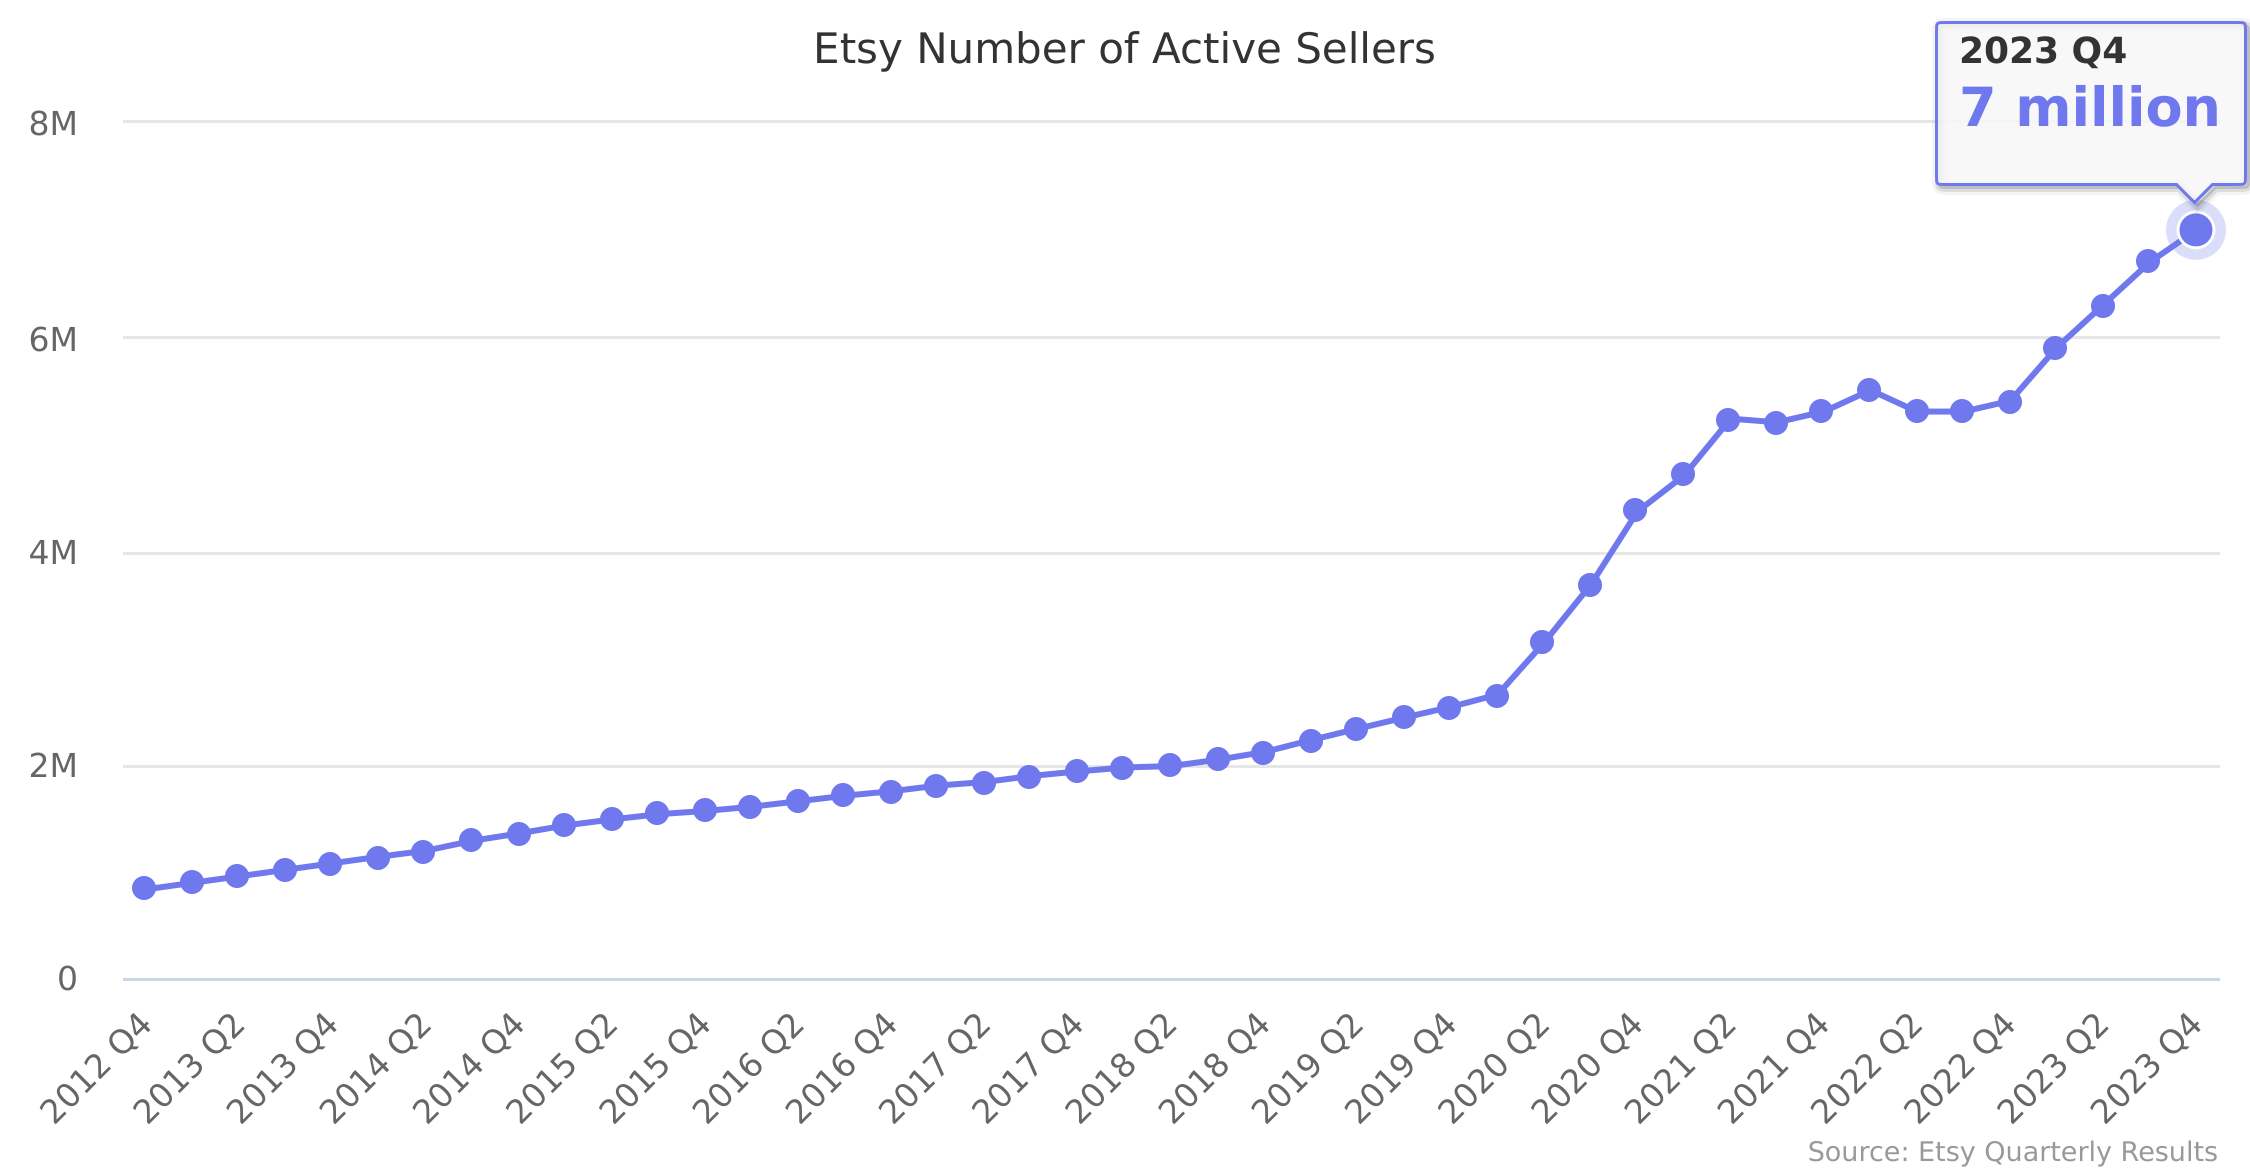 Etsy Number of Active Sellers 2012-2023